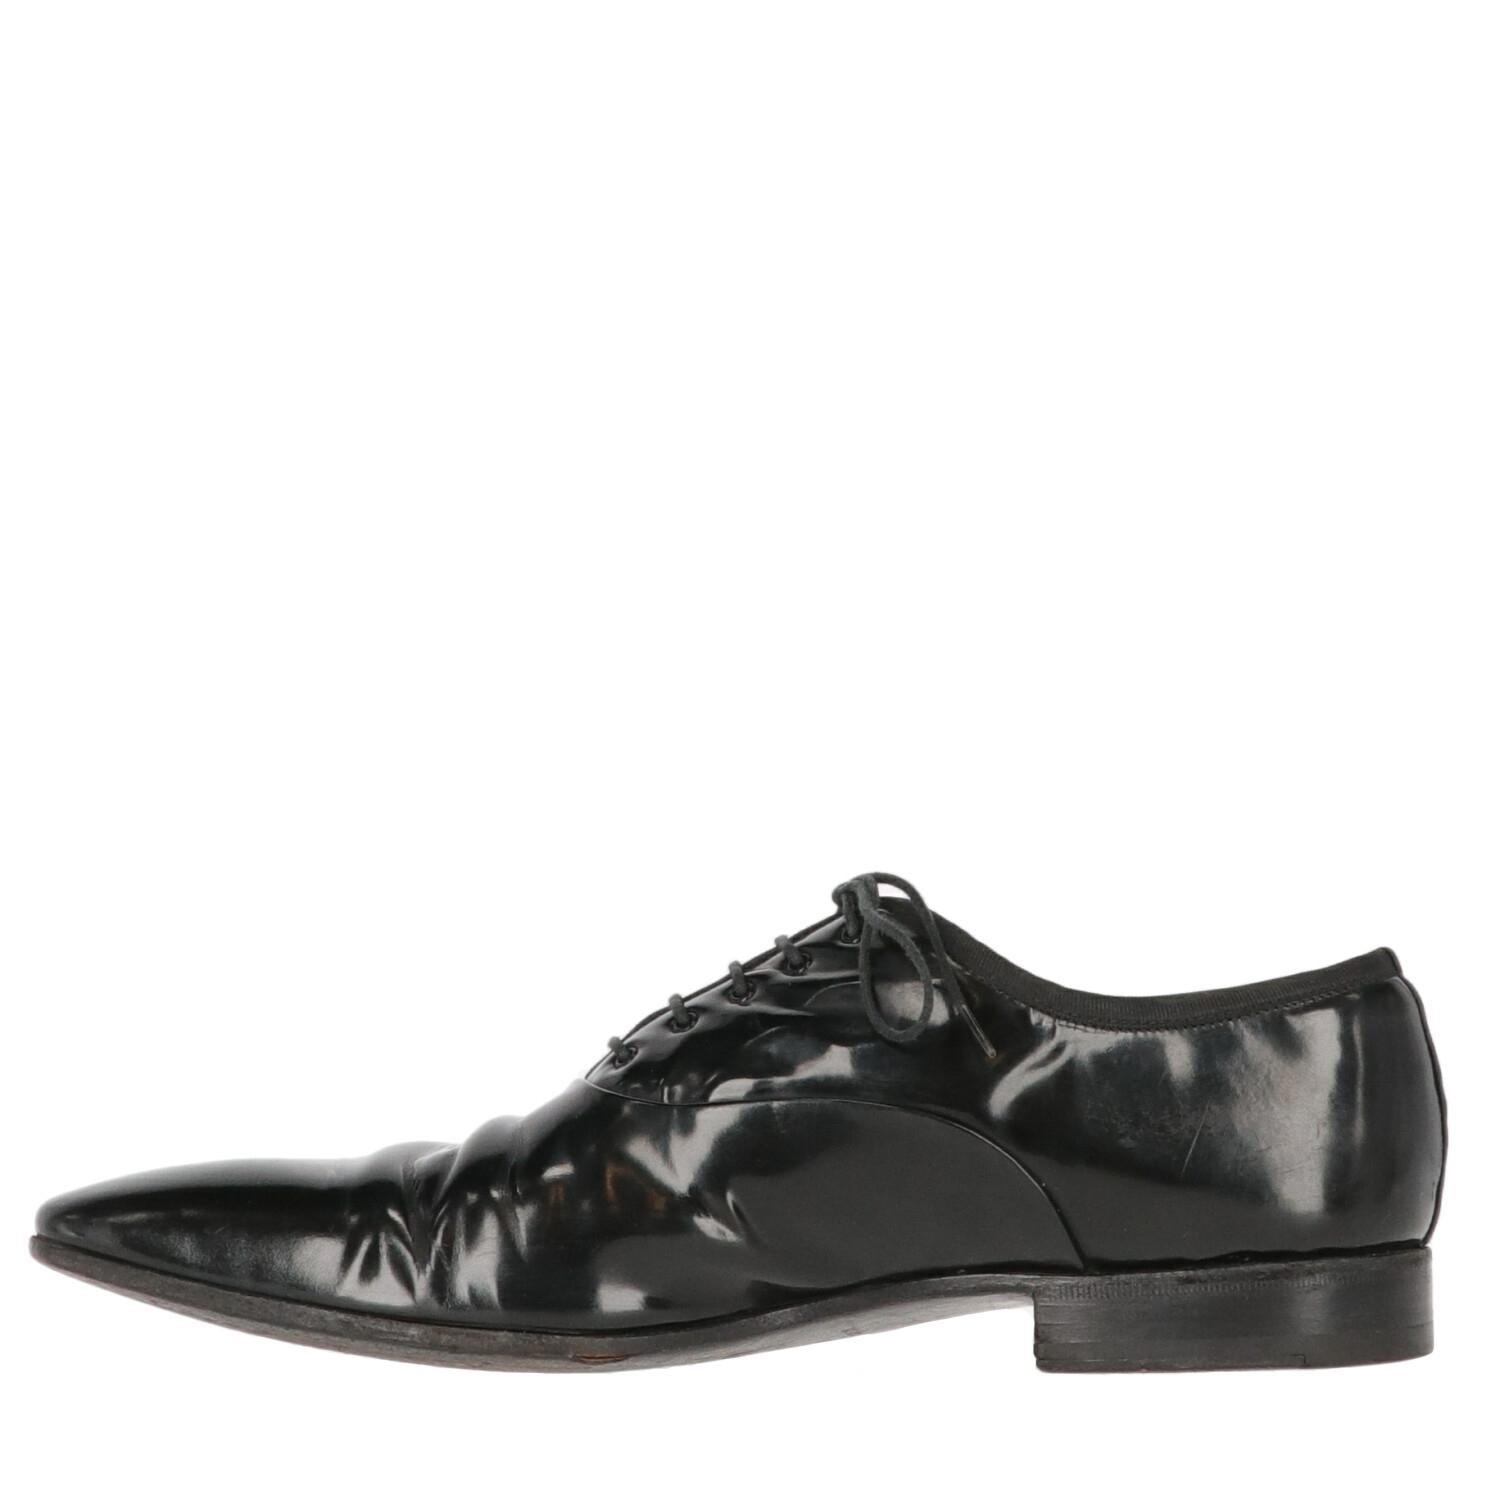 Sergio Rossi black patent leather classic lace-up shoes. Oxford model with grosgrain edge and rounded toe.

The item shows some some wrinkles and signs of wear on the leather, as shown in the pictures.
Years: 90s

Made in Italy

Size: 9 UK

Heel: